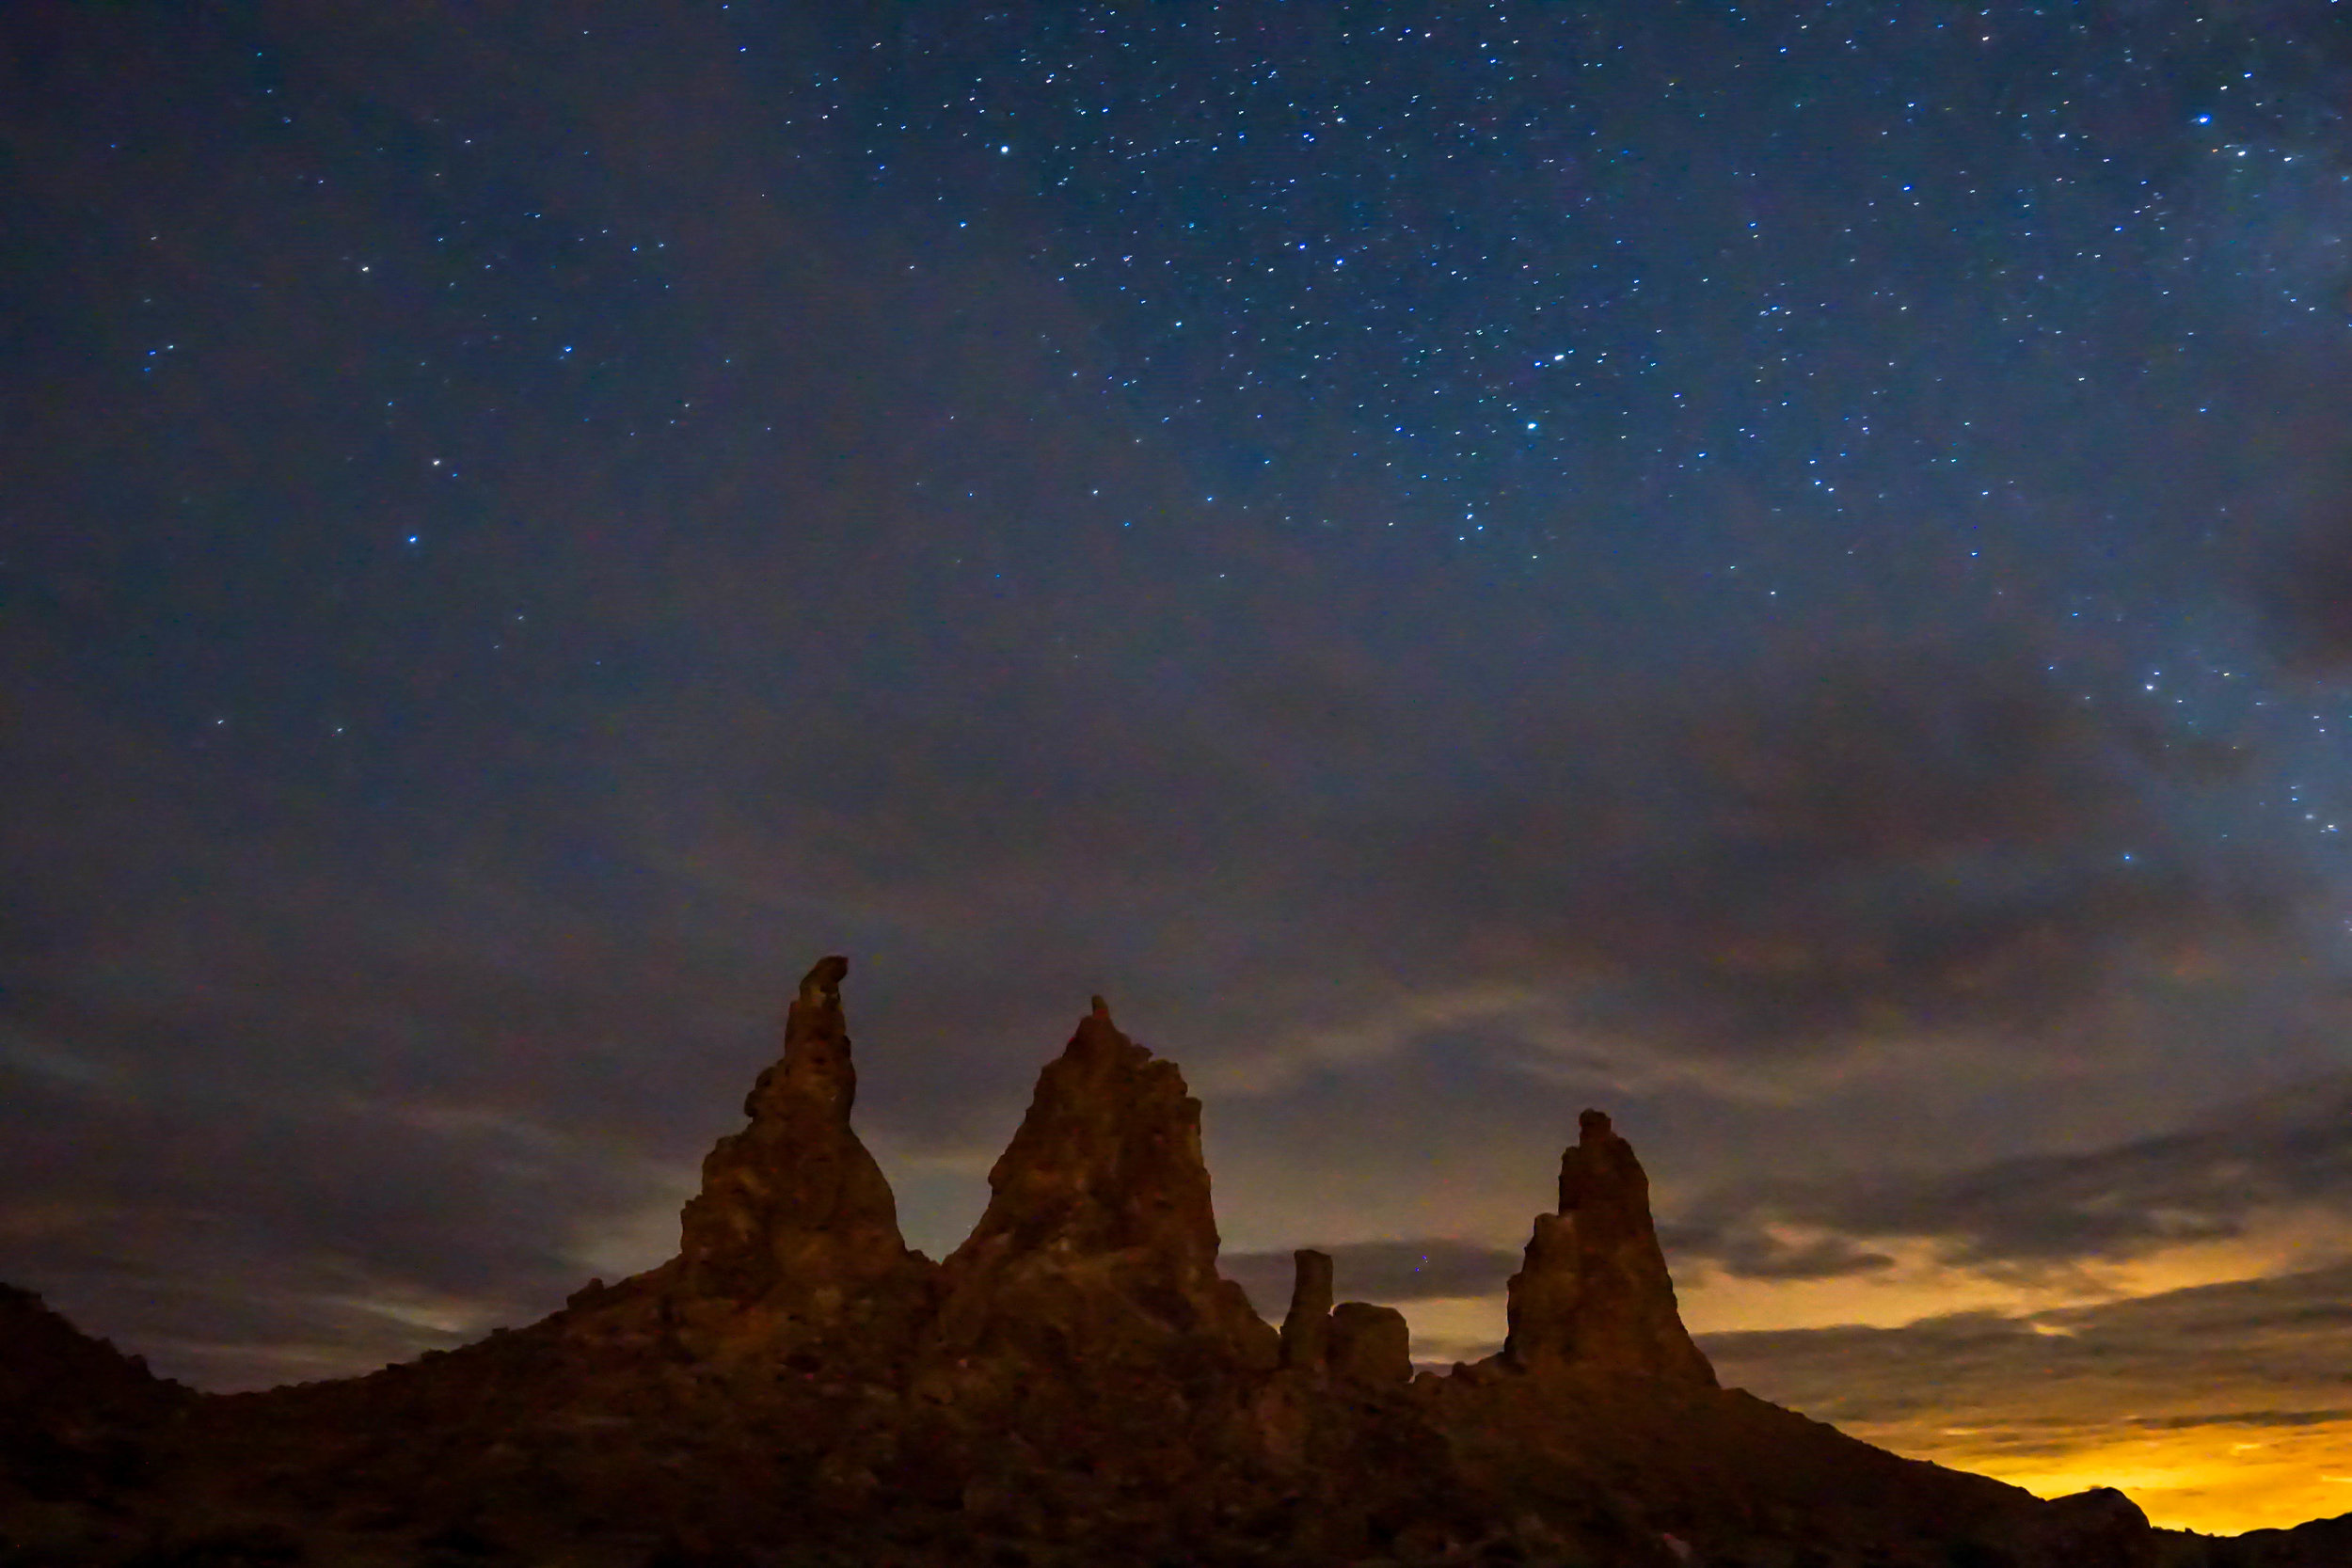 Once the stars come out, the spaced out nature of these spires becomes all the more apparent.